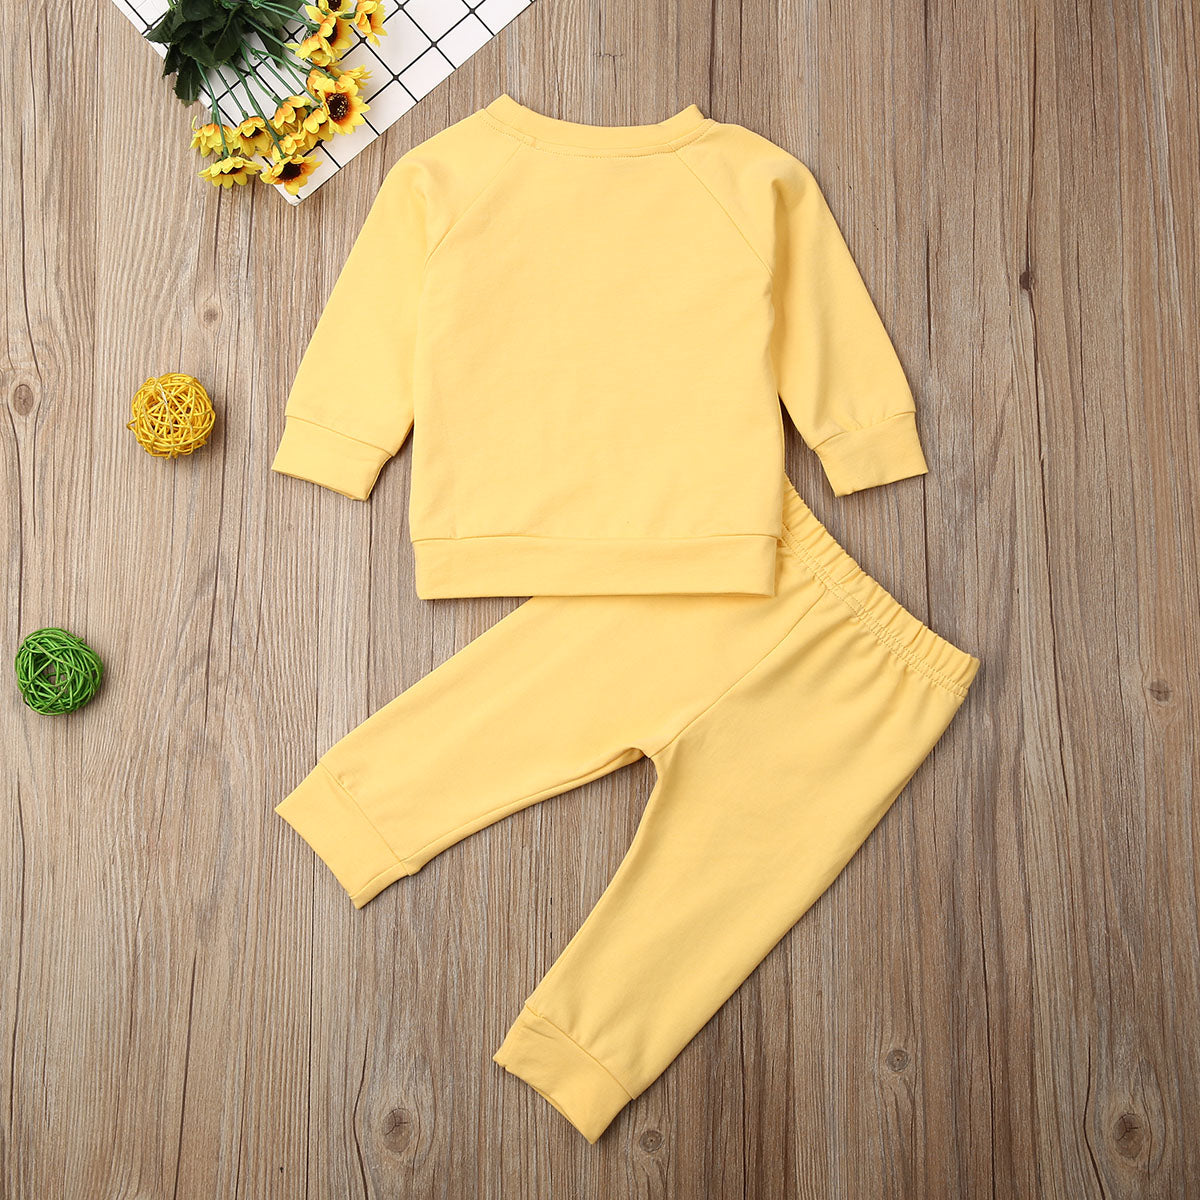 Baby and Child Cotton Unisex Tracksuits